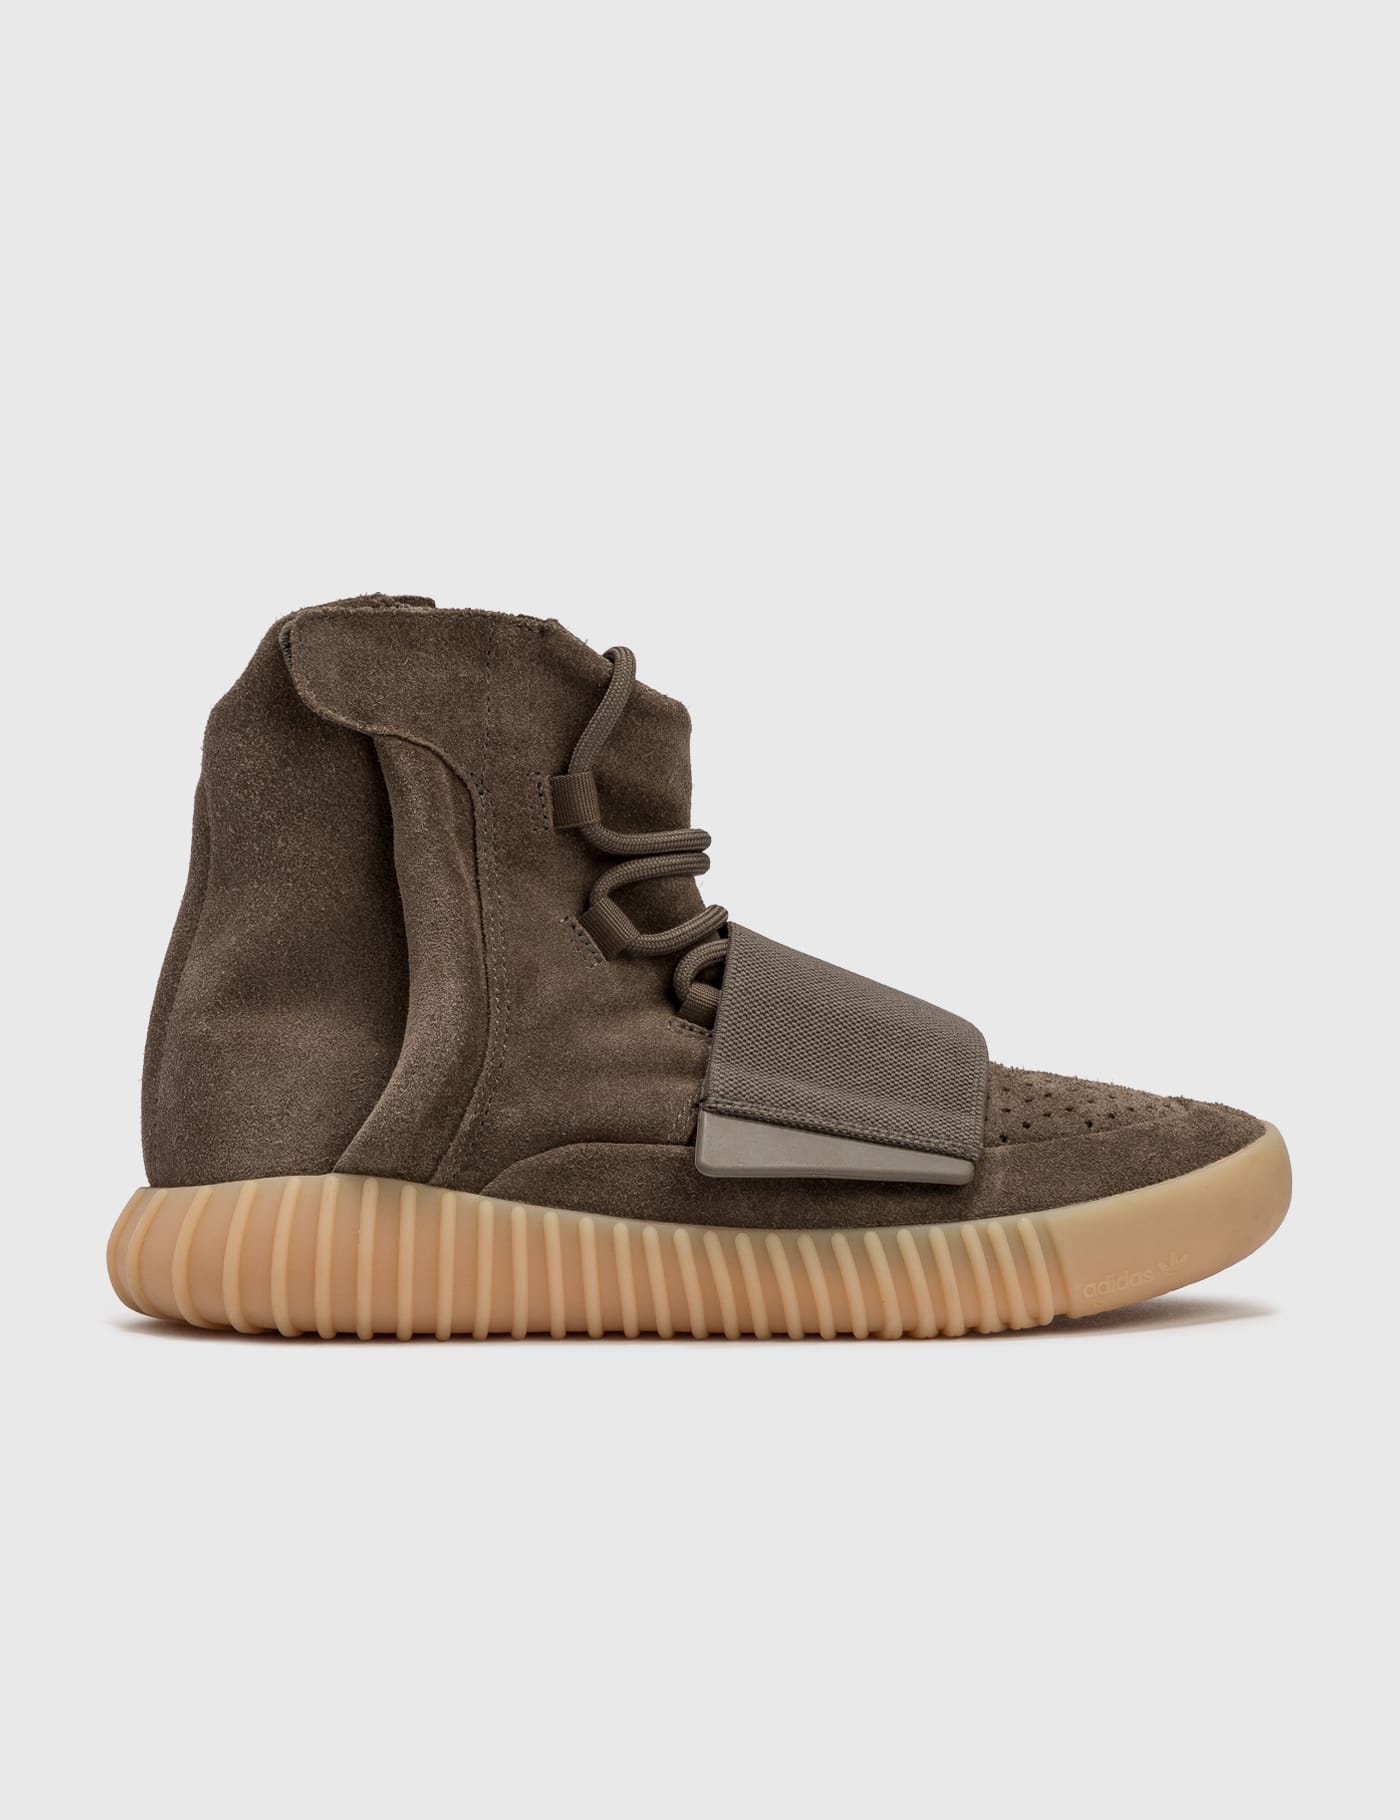 yeezy boost 750 in box